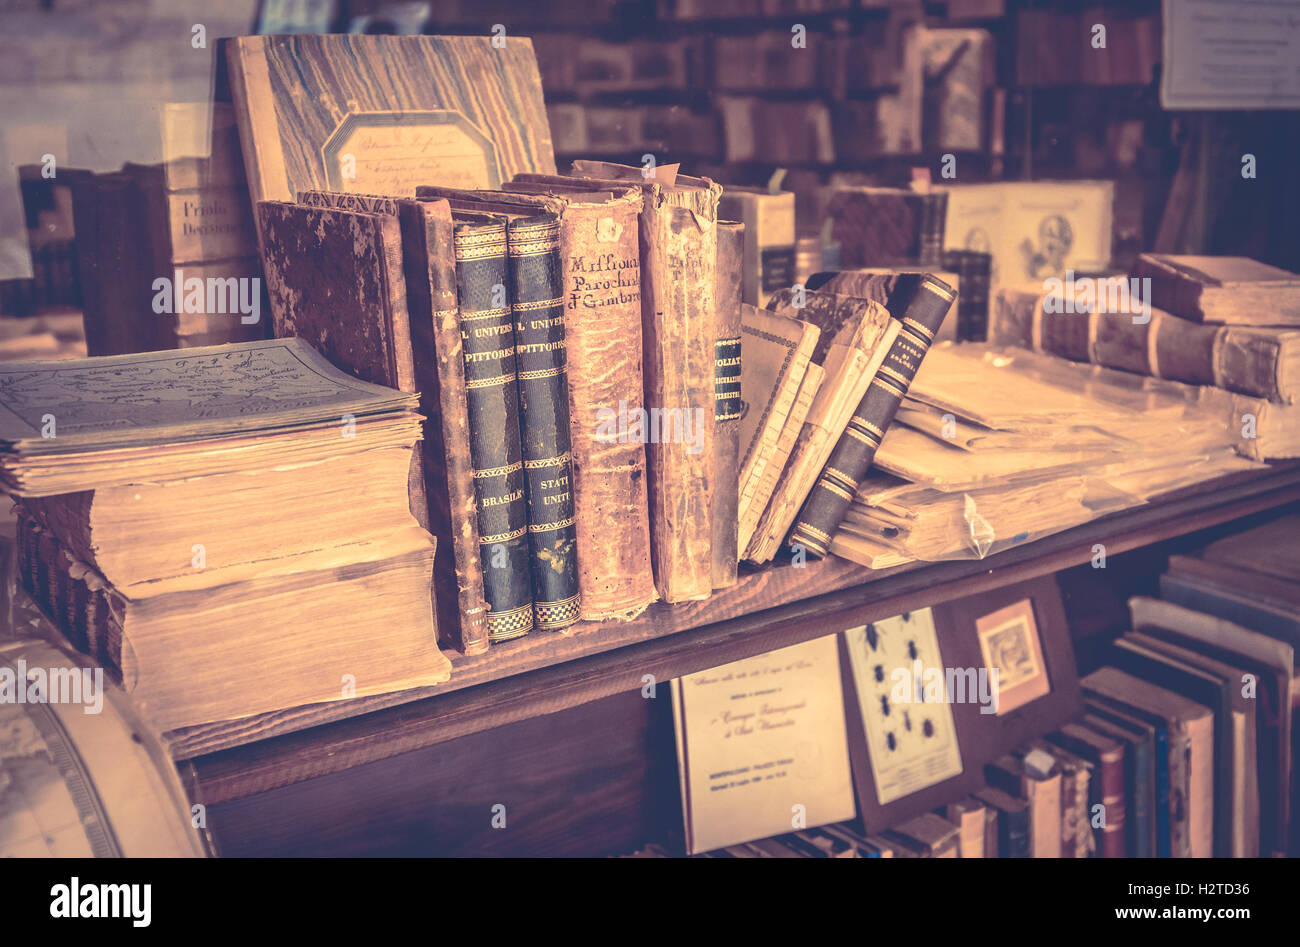 MONTEPULCIANO, ITALY - JUNE 23, 2015: collection of antique books and maps in tuscan antiquarian bookshop in Montepulciano town, Stock Photo